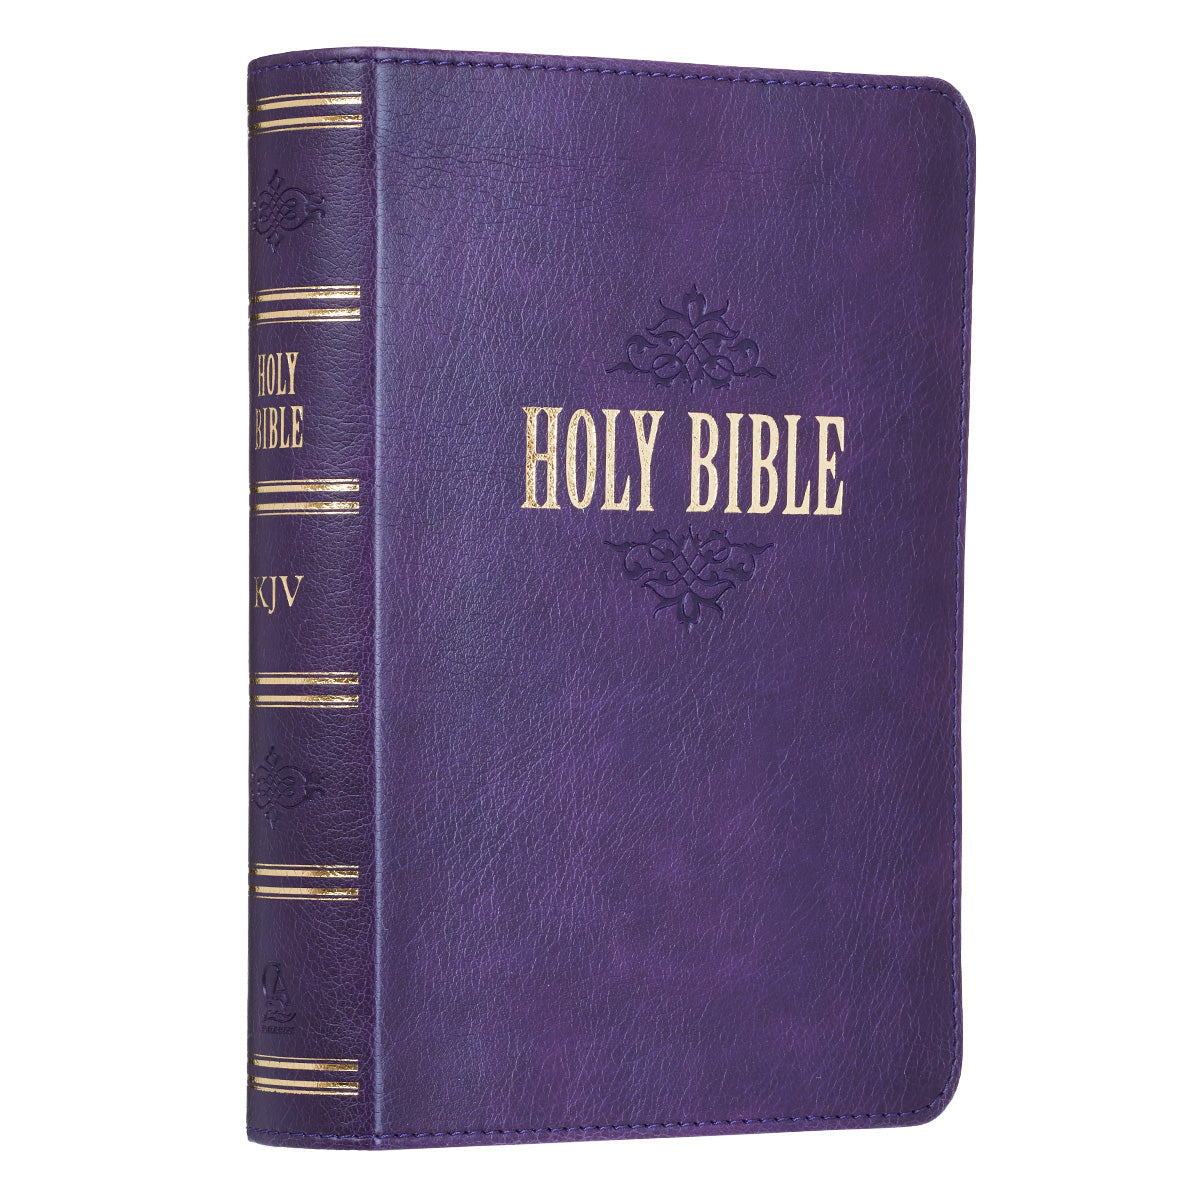 Image of KJV Compact Large Print Bible, Purple, Lux-Leather, Words of Christ in Red, Concordance, Unique Scripture Verse Finder, Bible Reading, Full-Color Maps, Presentation Page other